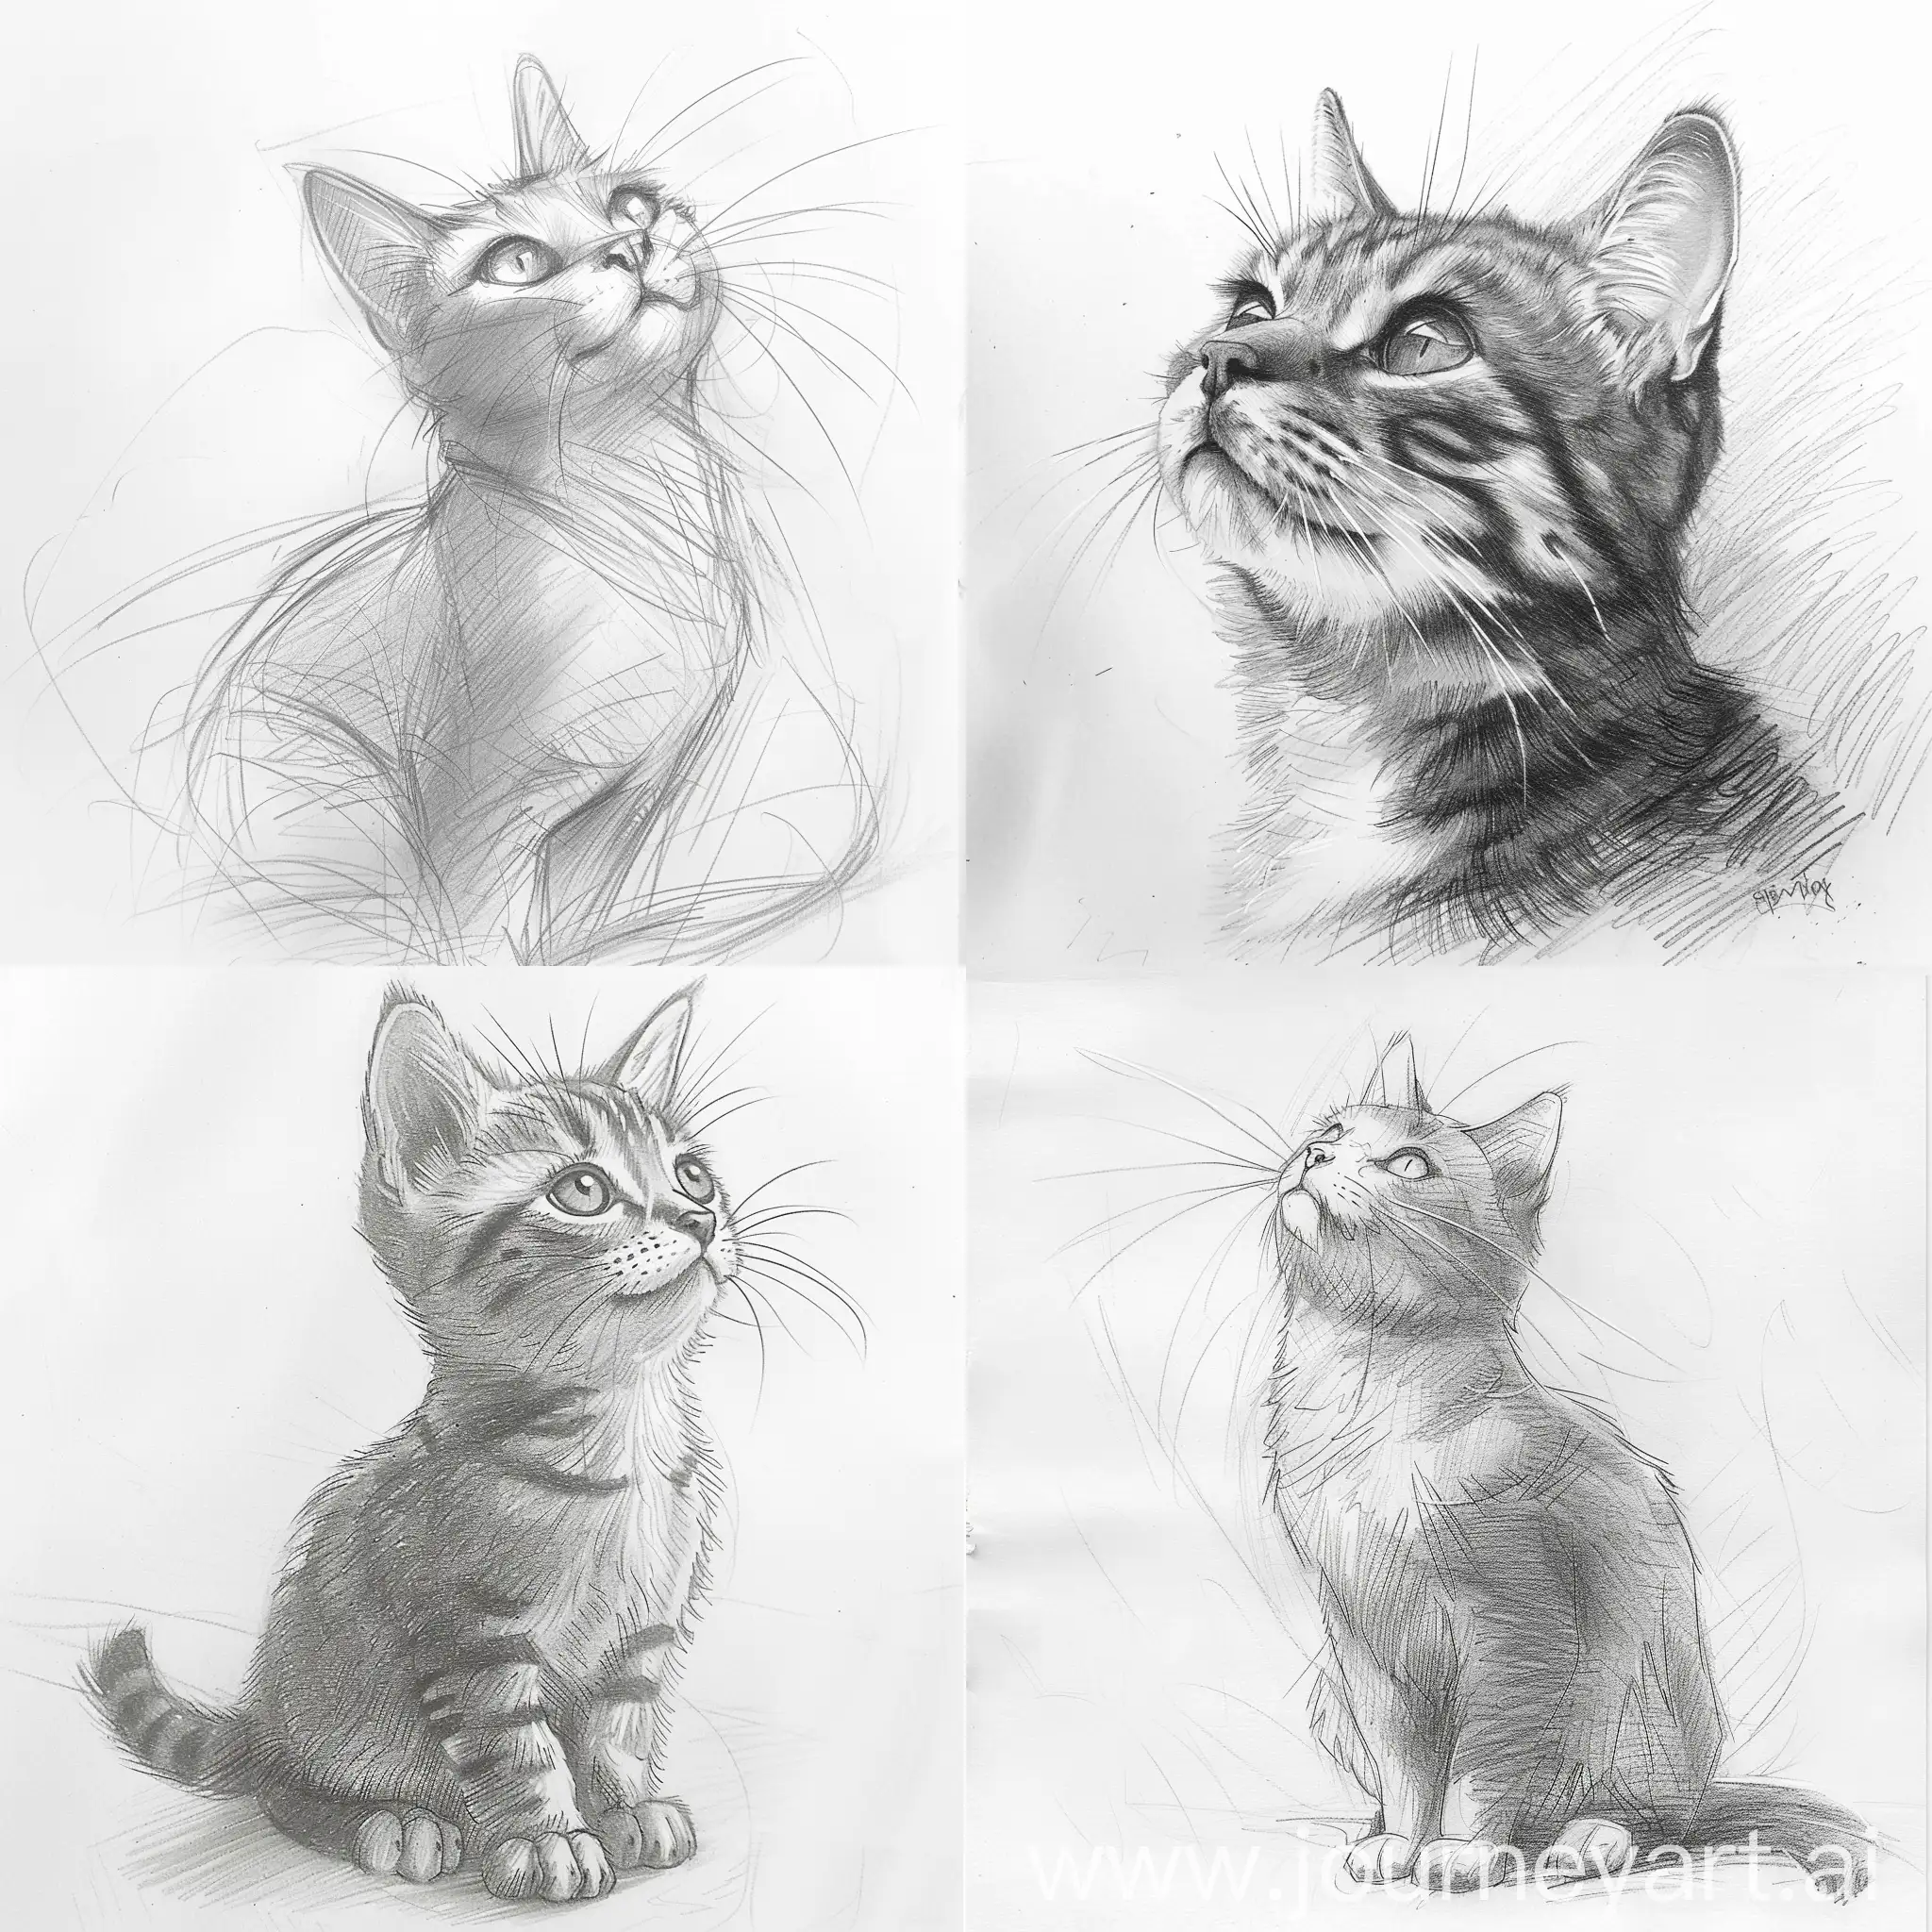 art class, step by step process, drawing cat, pencil sketch,